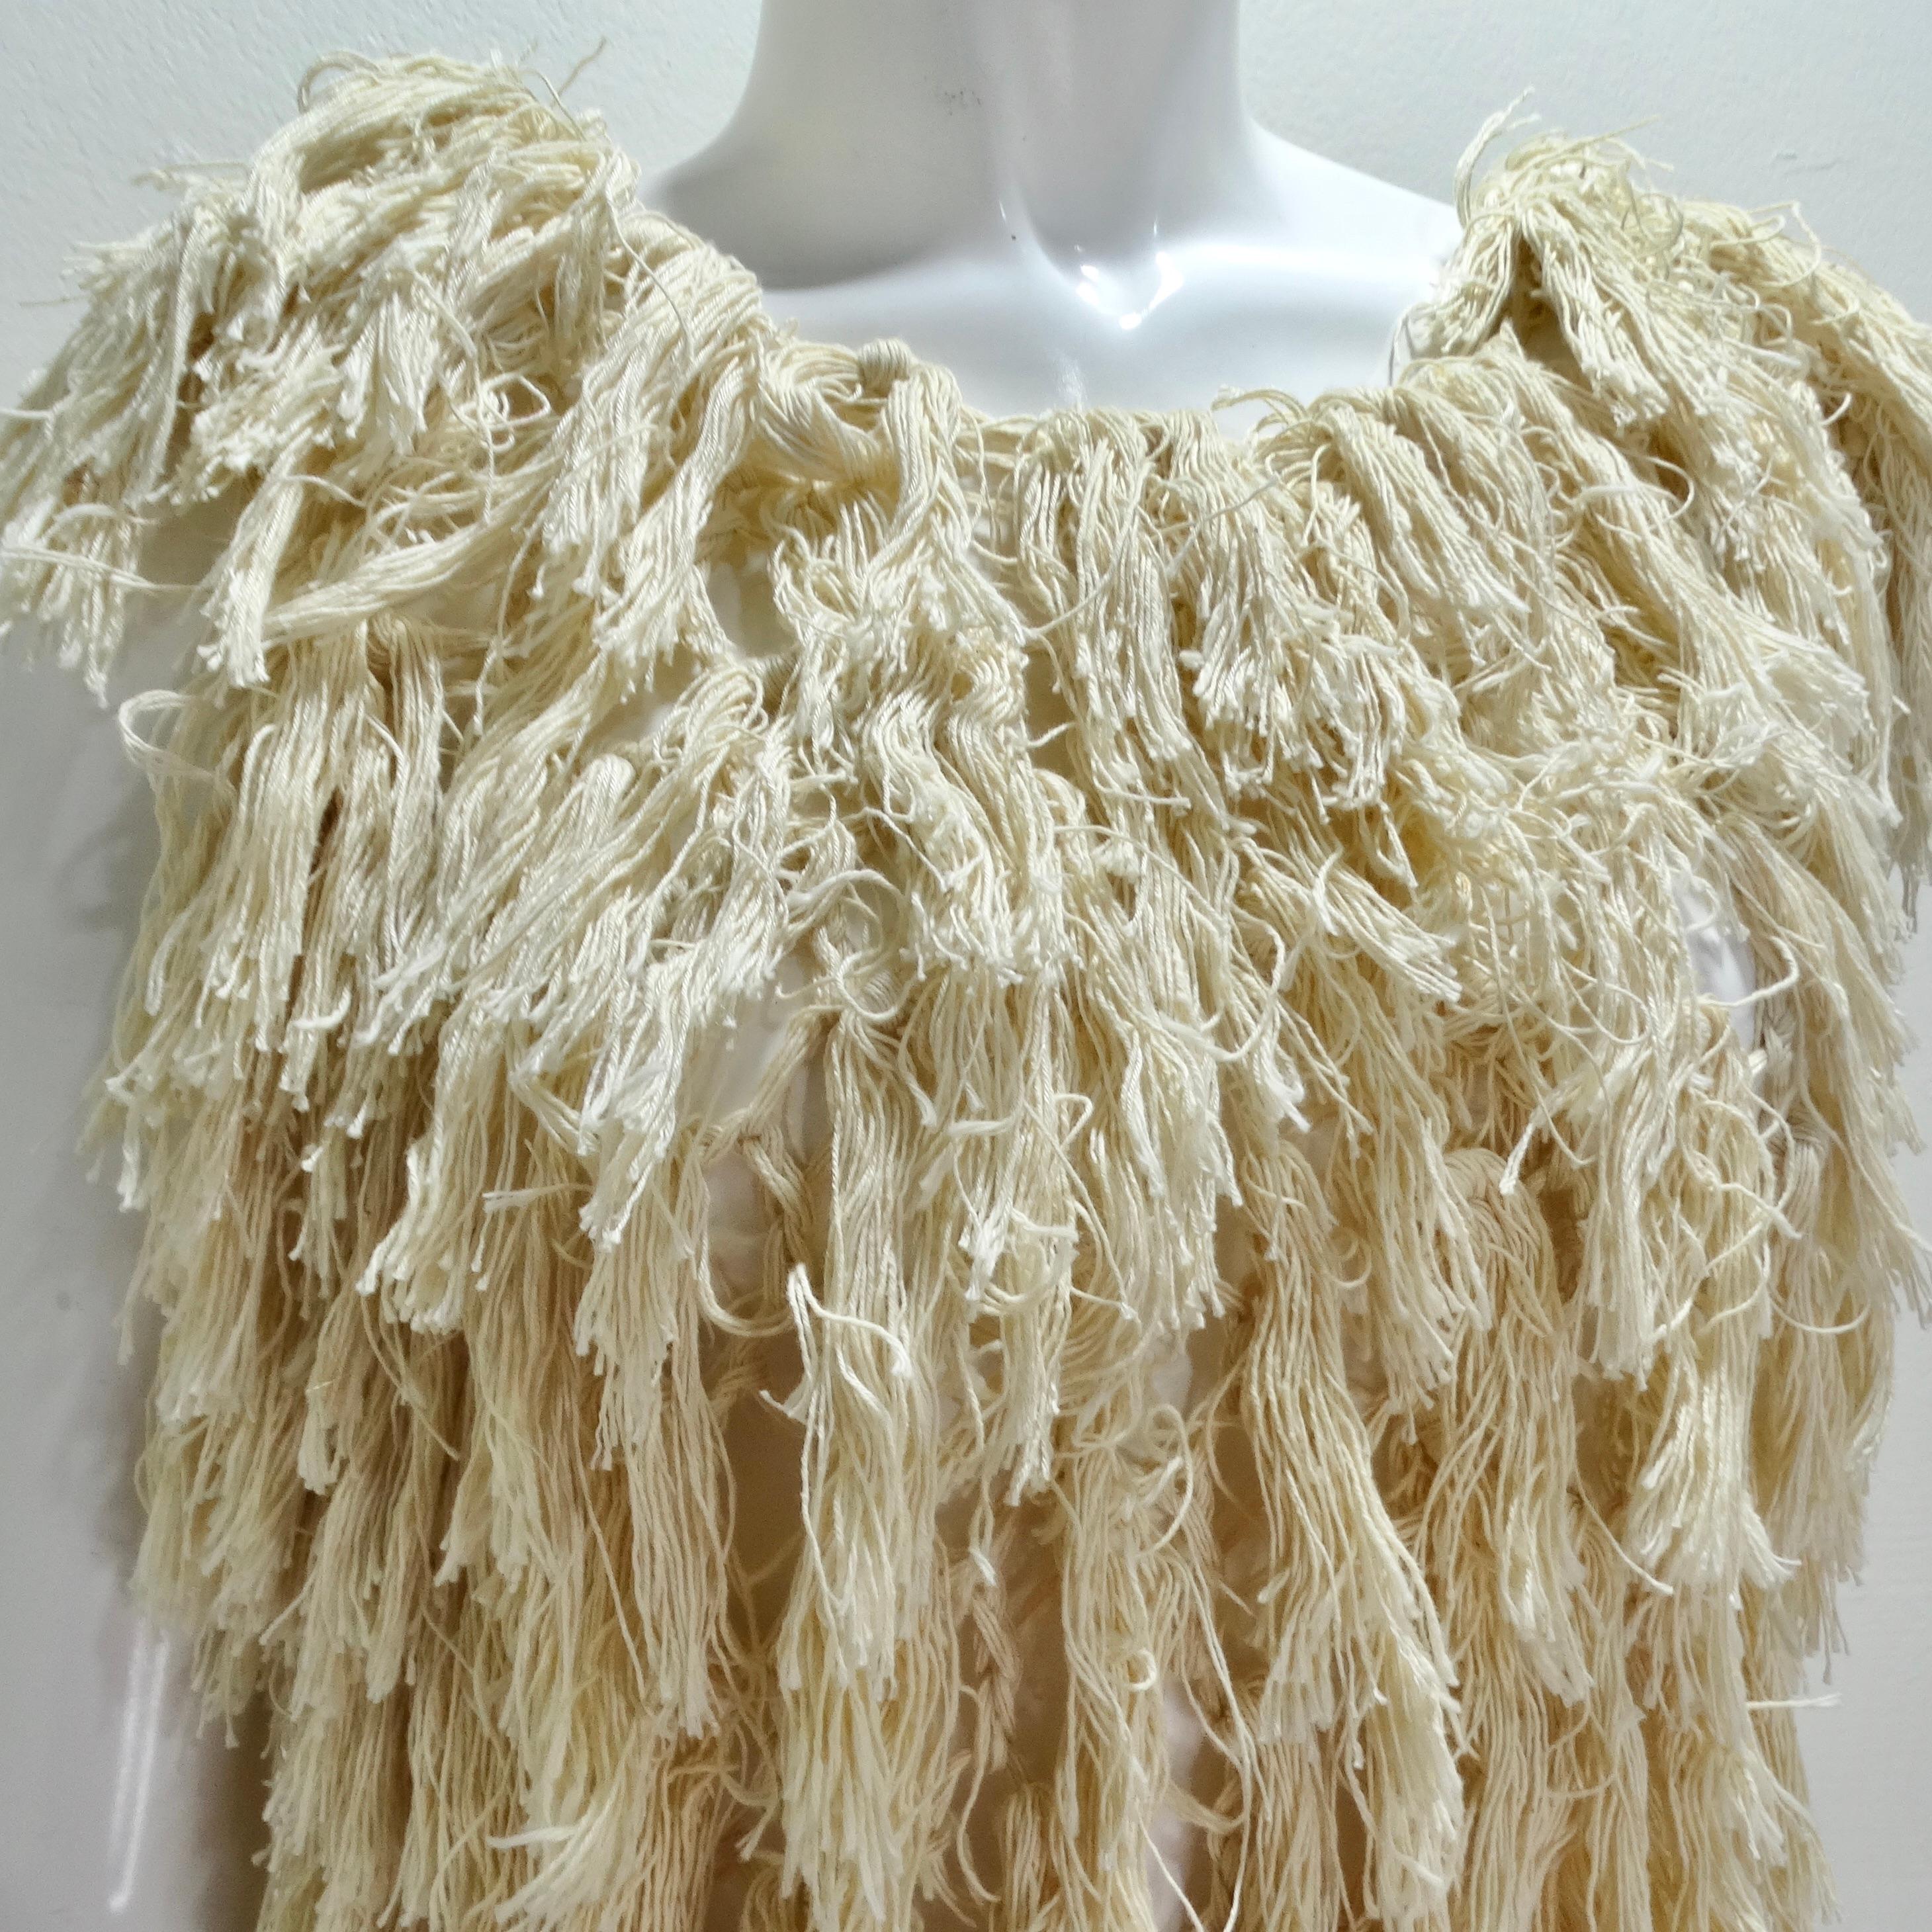 Introducing the 1980s Shaggy Fringe Knit Top – a distinctive and playful statement piece that effortlessly captures the spirit of the '80s with its shaggy fringe and unique 3D effect. This neutral off-white knit top is a versatile addition to your